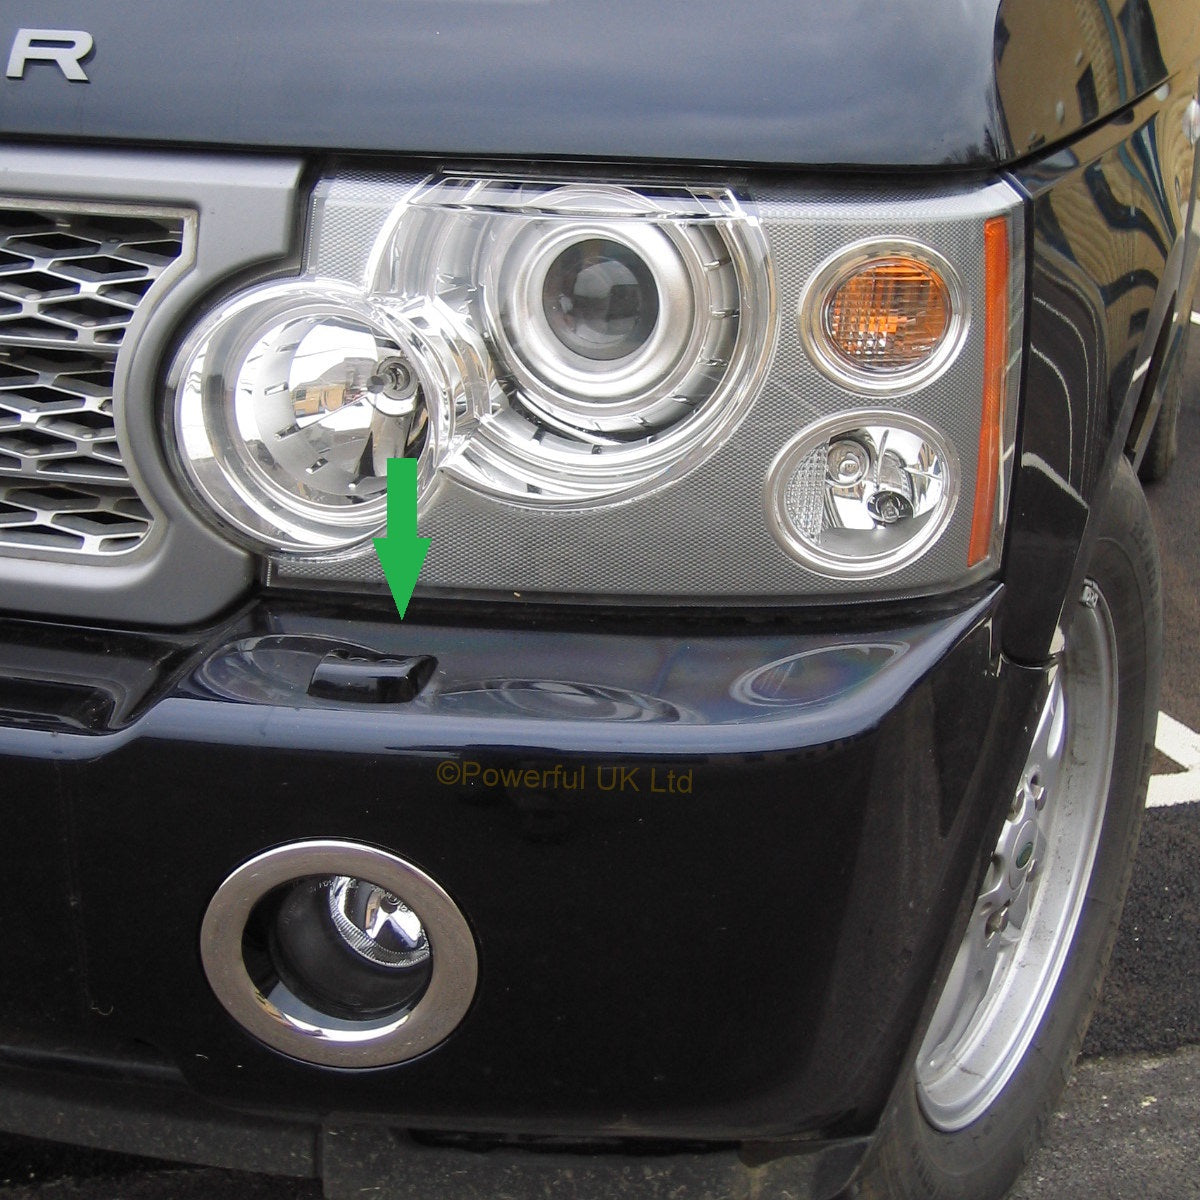 Headlight Washer Jet Covers in Orkney Grey for Range Rover L322 Vogue